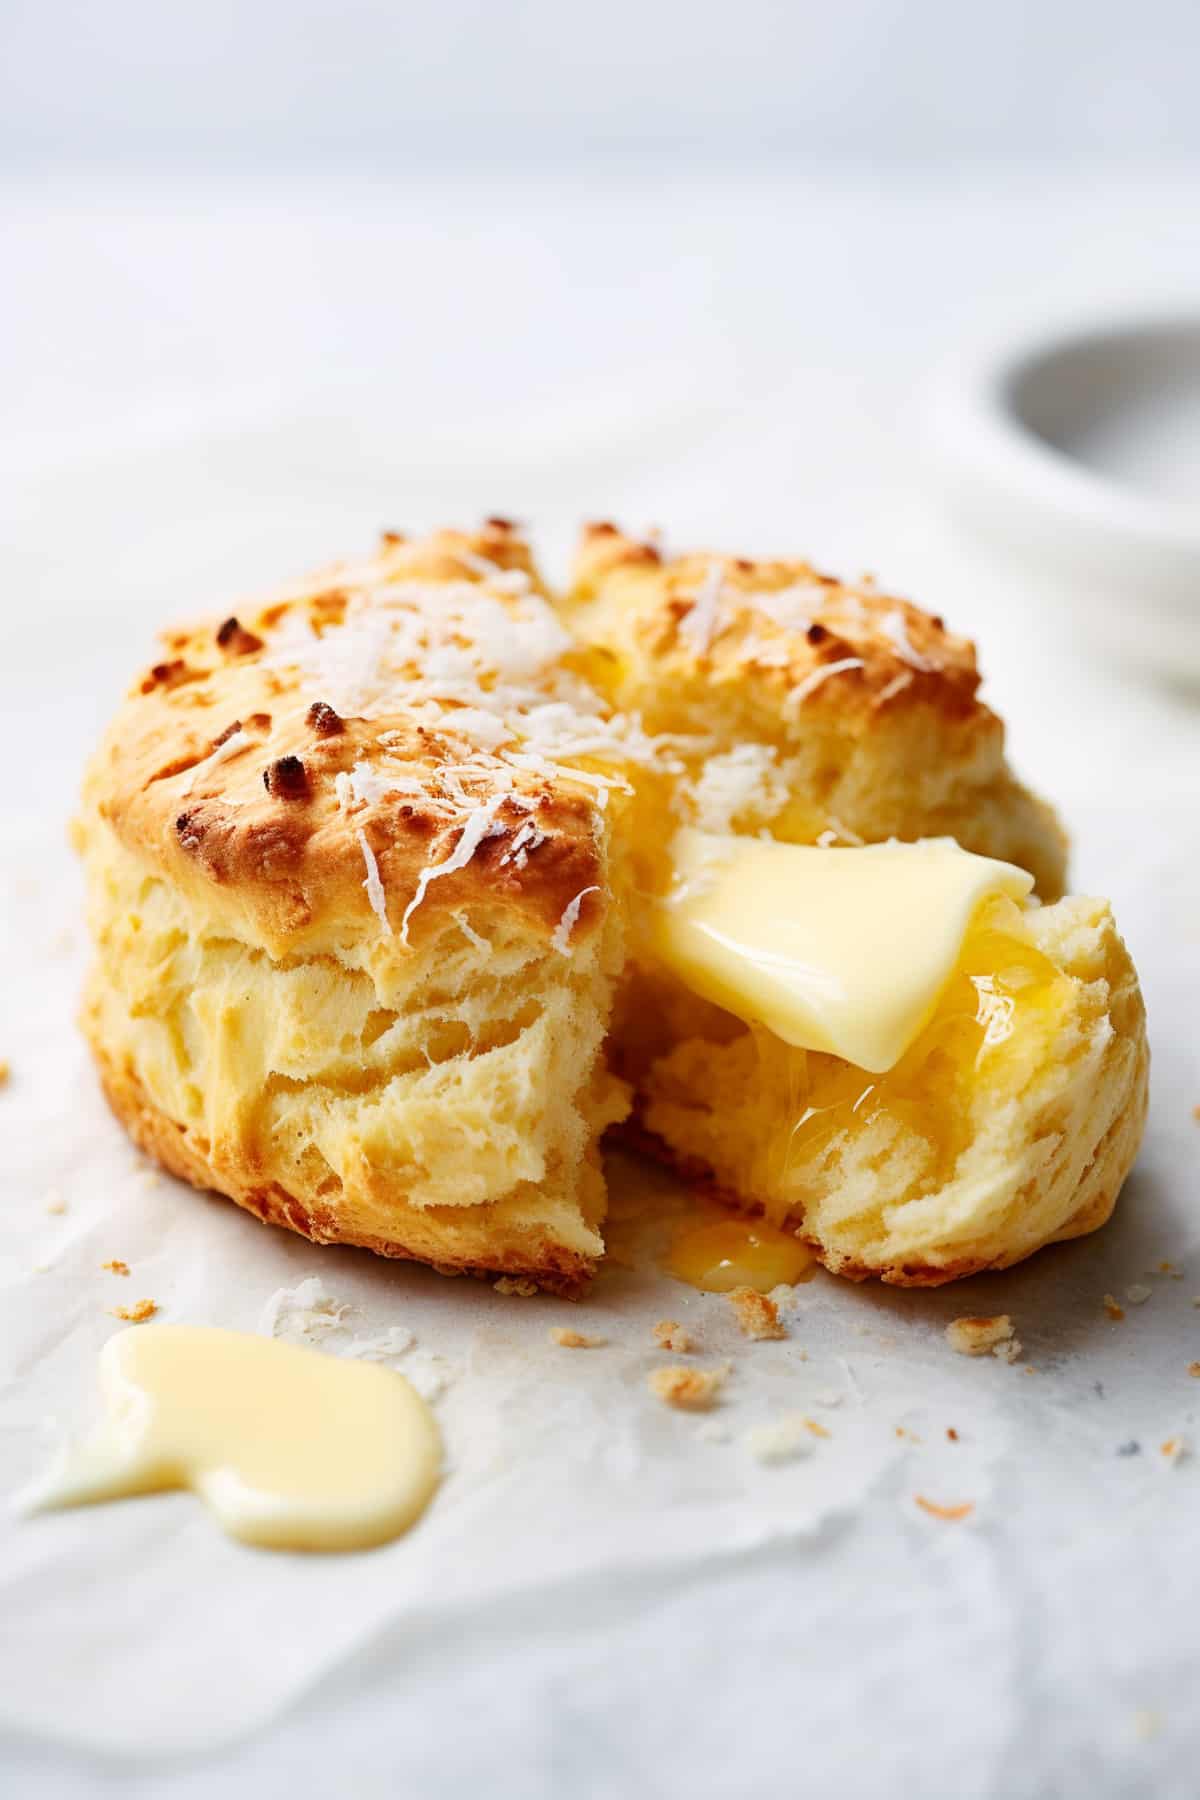 Warm cheese scone with melting butter.